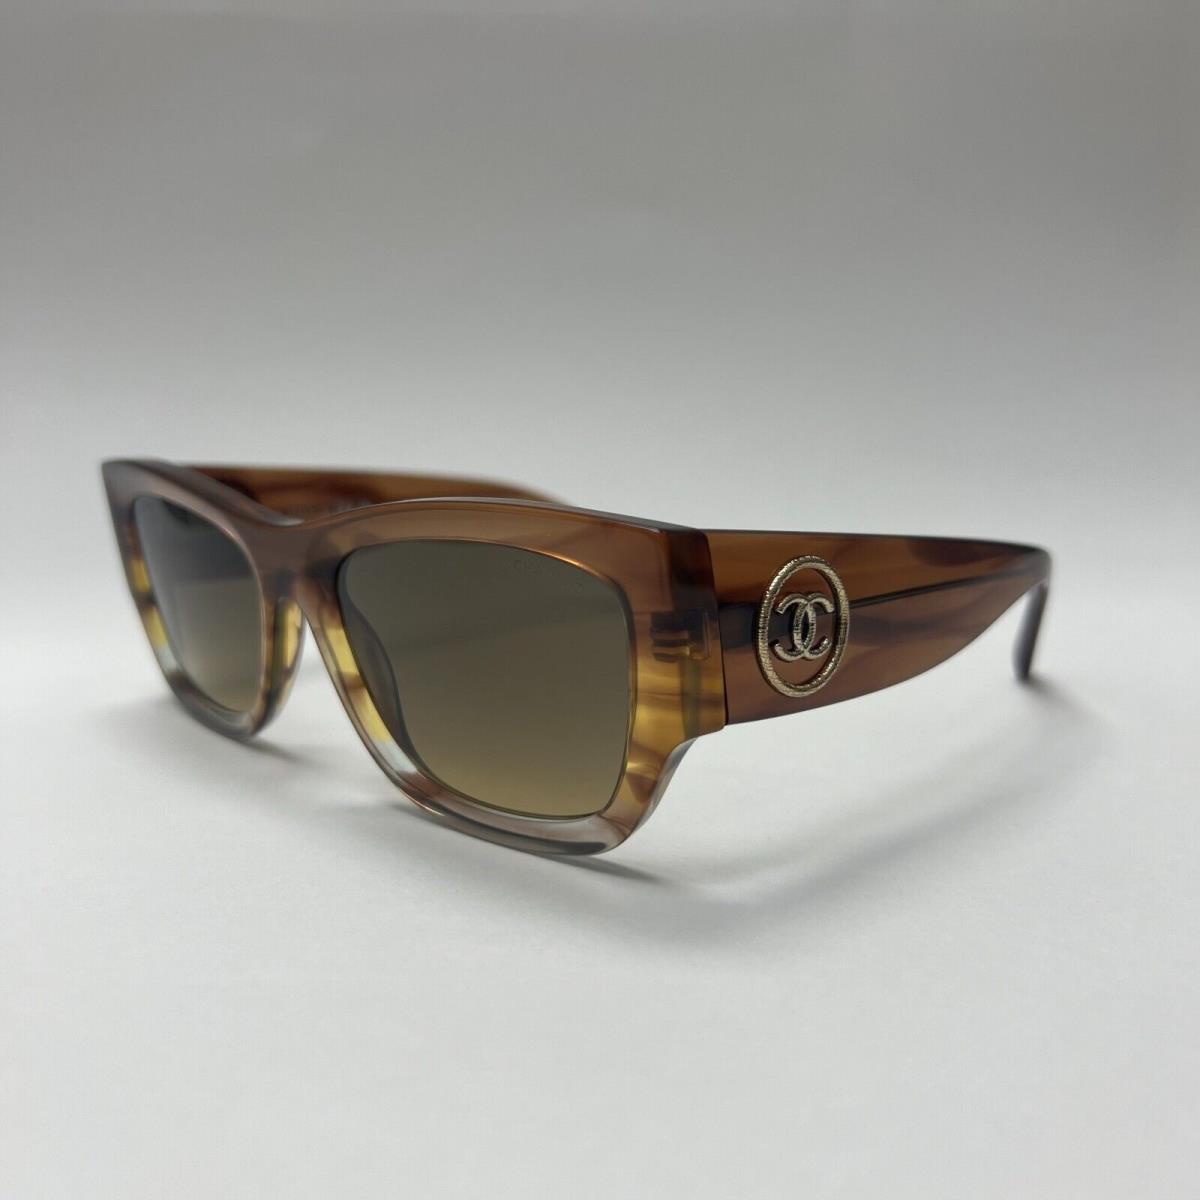 Chanel 5507 1745/11 54-19 Brown and Yellow Frame W/yellow Lens